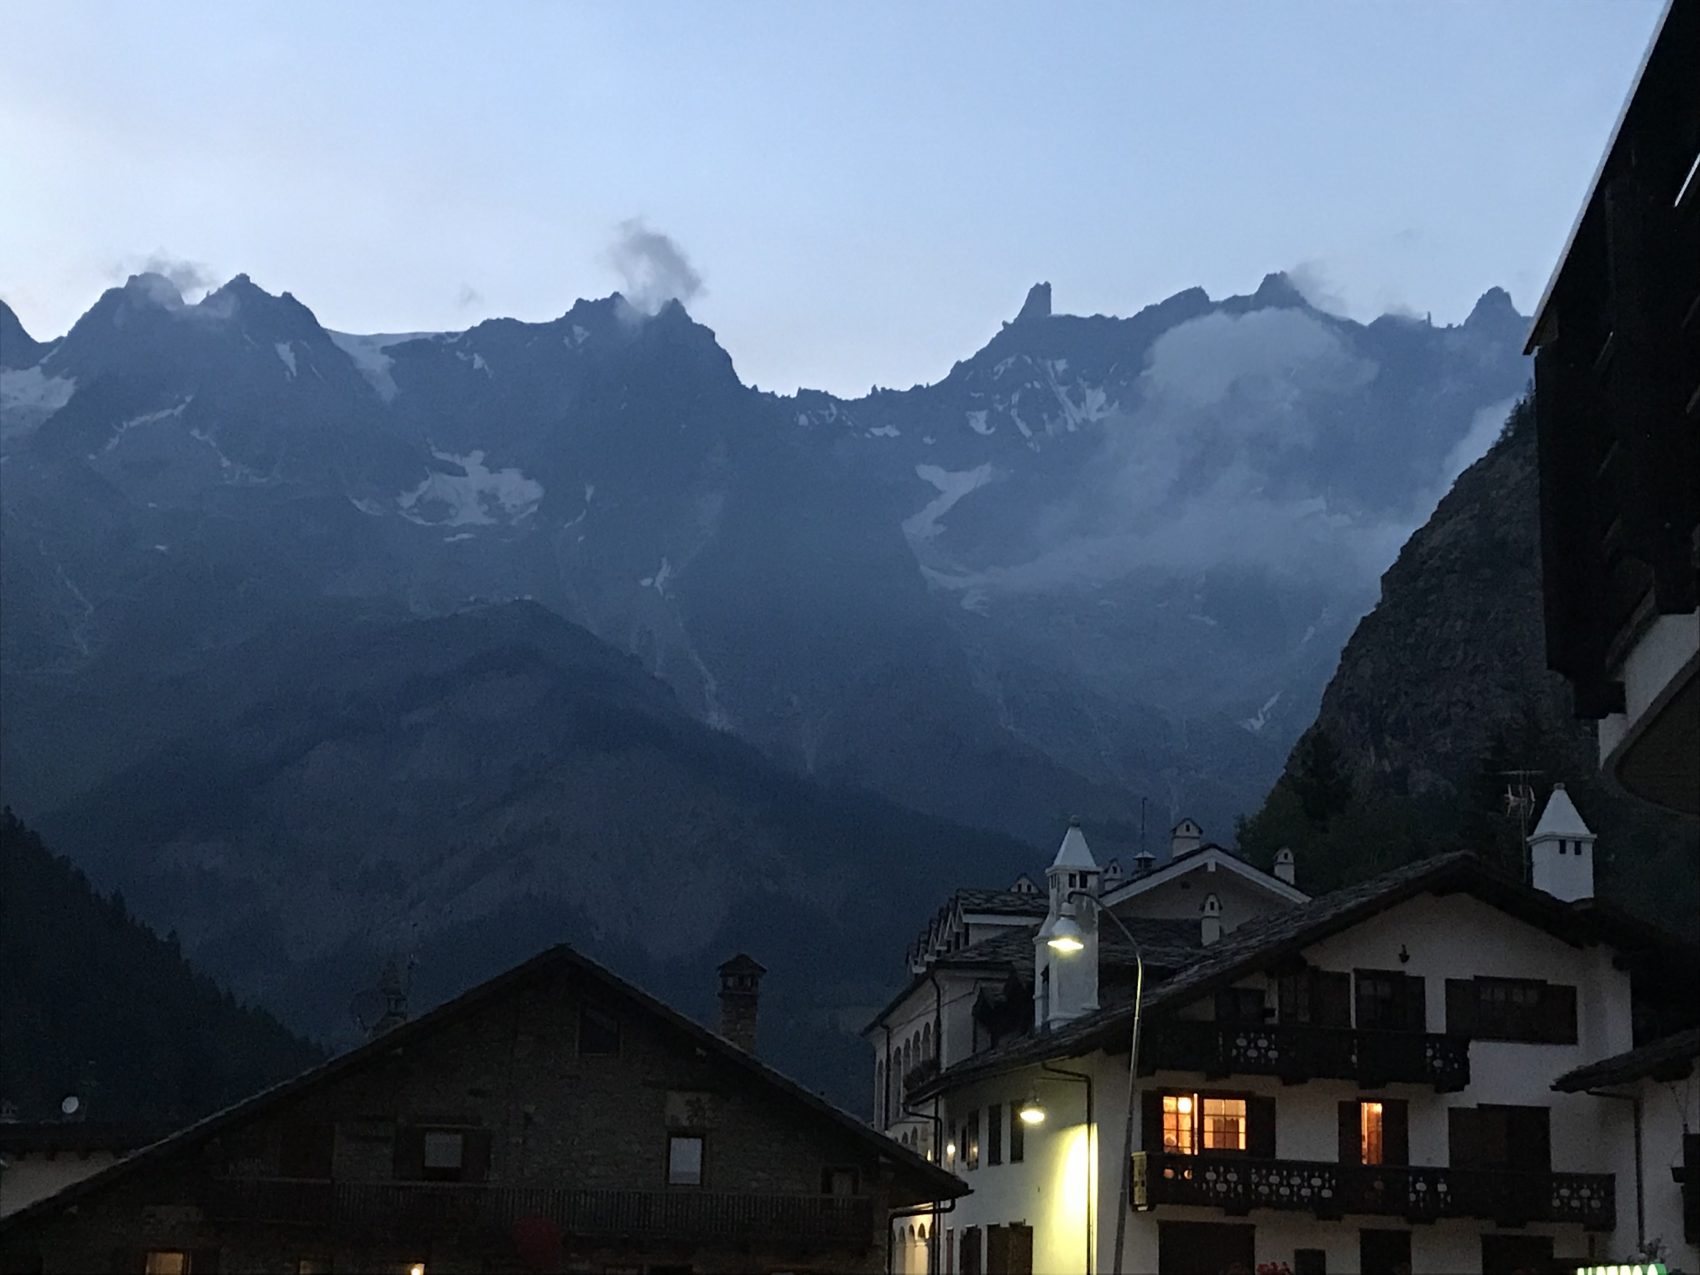 Nightime coming to Courmayeur- Photo: The-Ski-Guru. Our summer in the mountains – one week in Courmayeur.